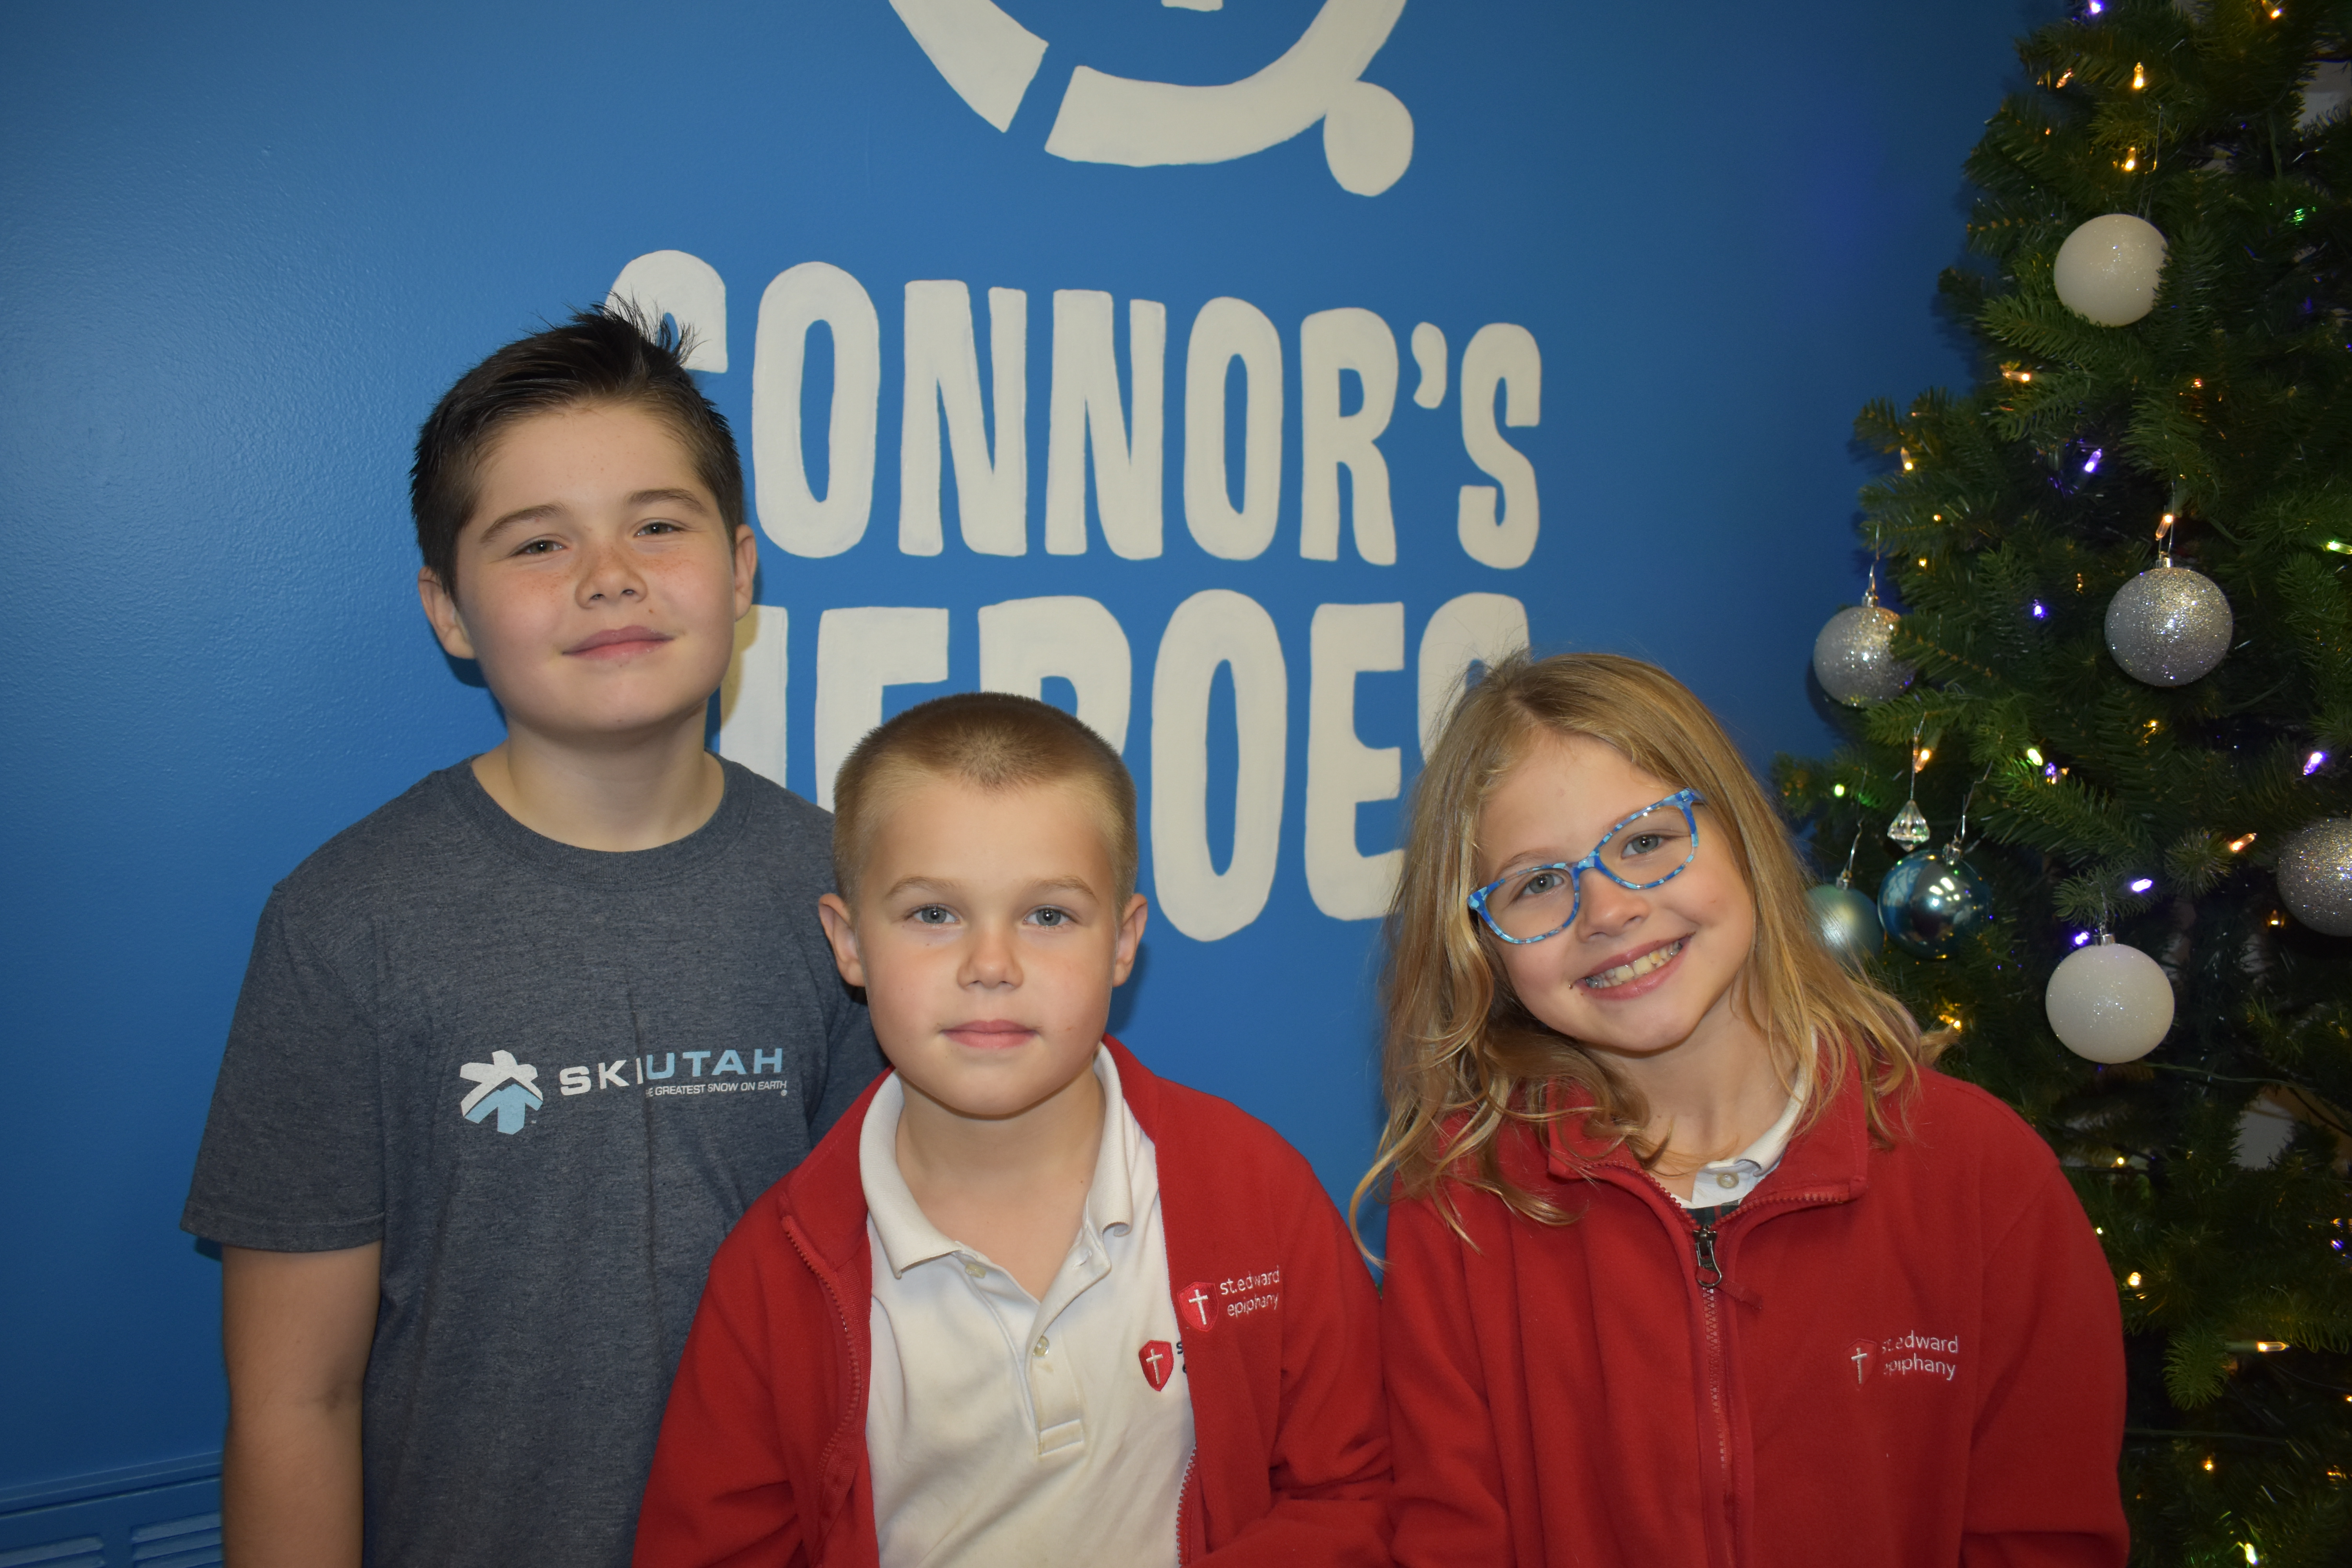 Three siblings smiling and standing in front of the Connor's Heroes logo wall